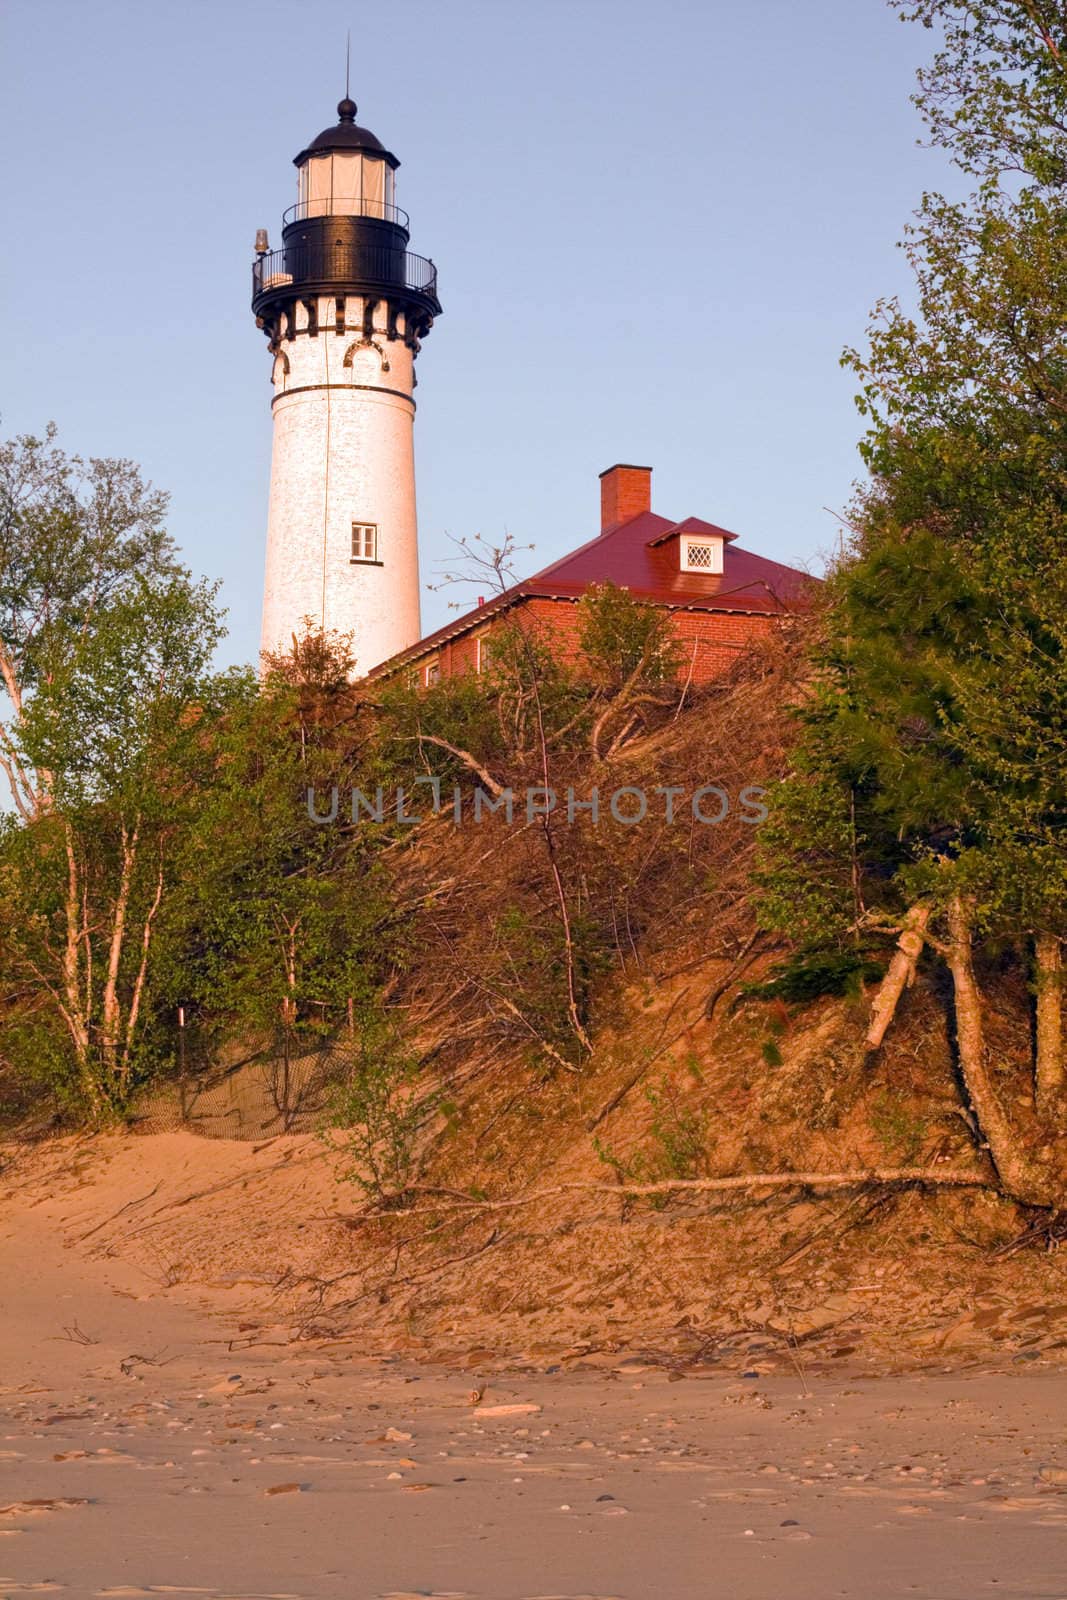 Late afternoon by Au Sable Light Station - Pictured Rocks National Lakeshore